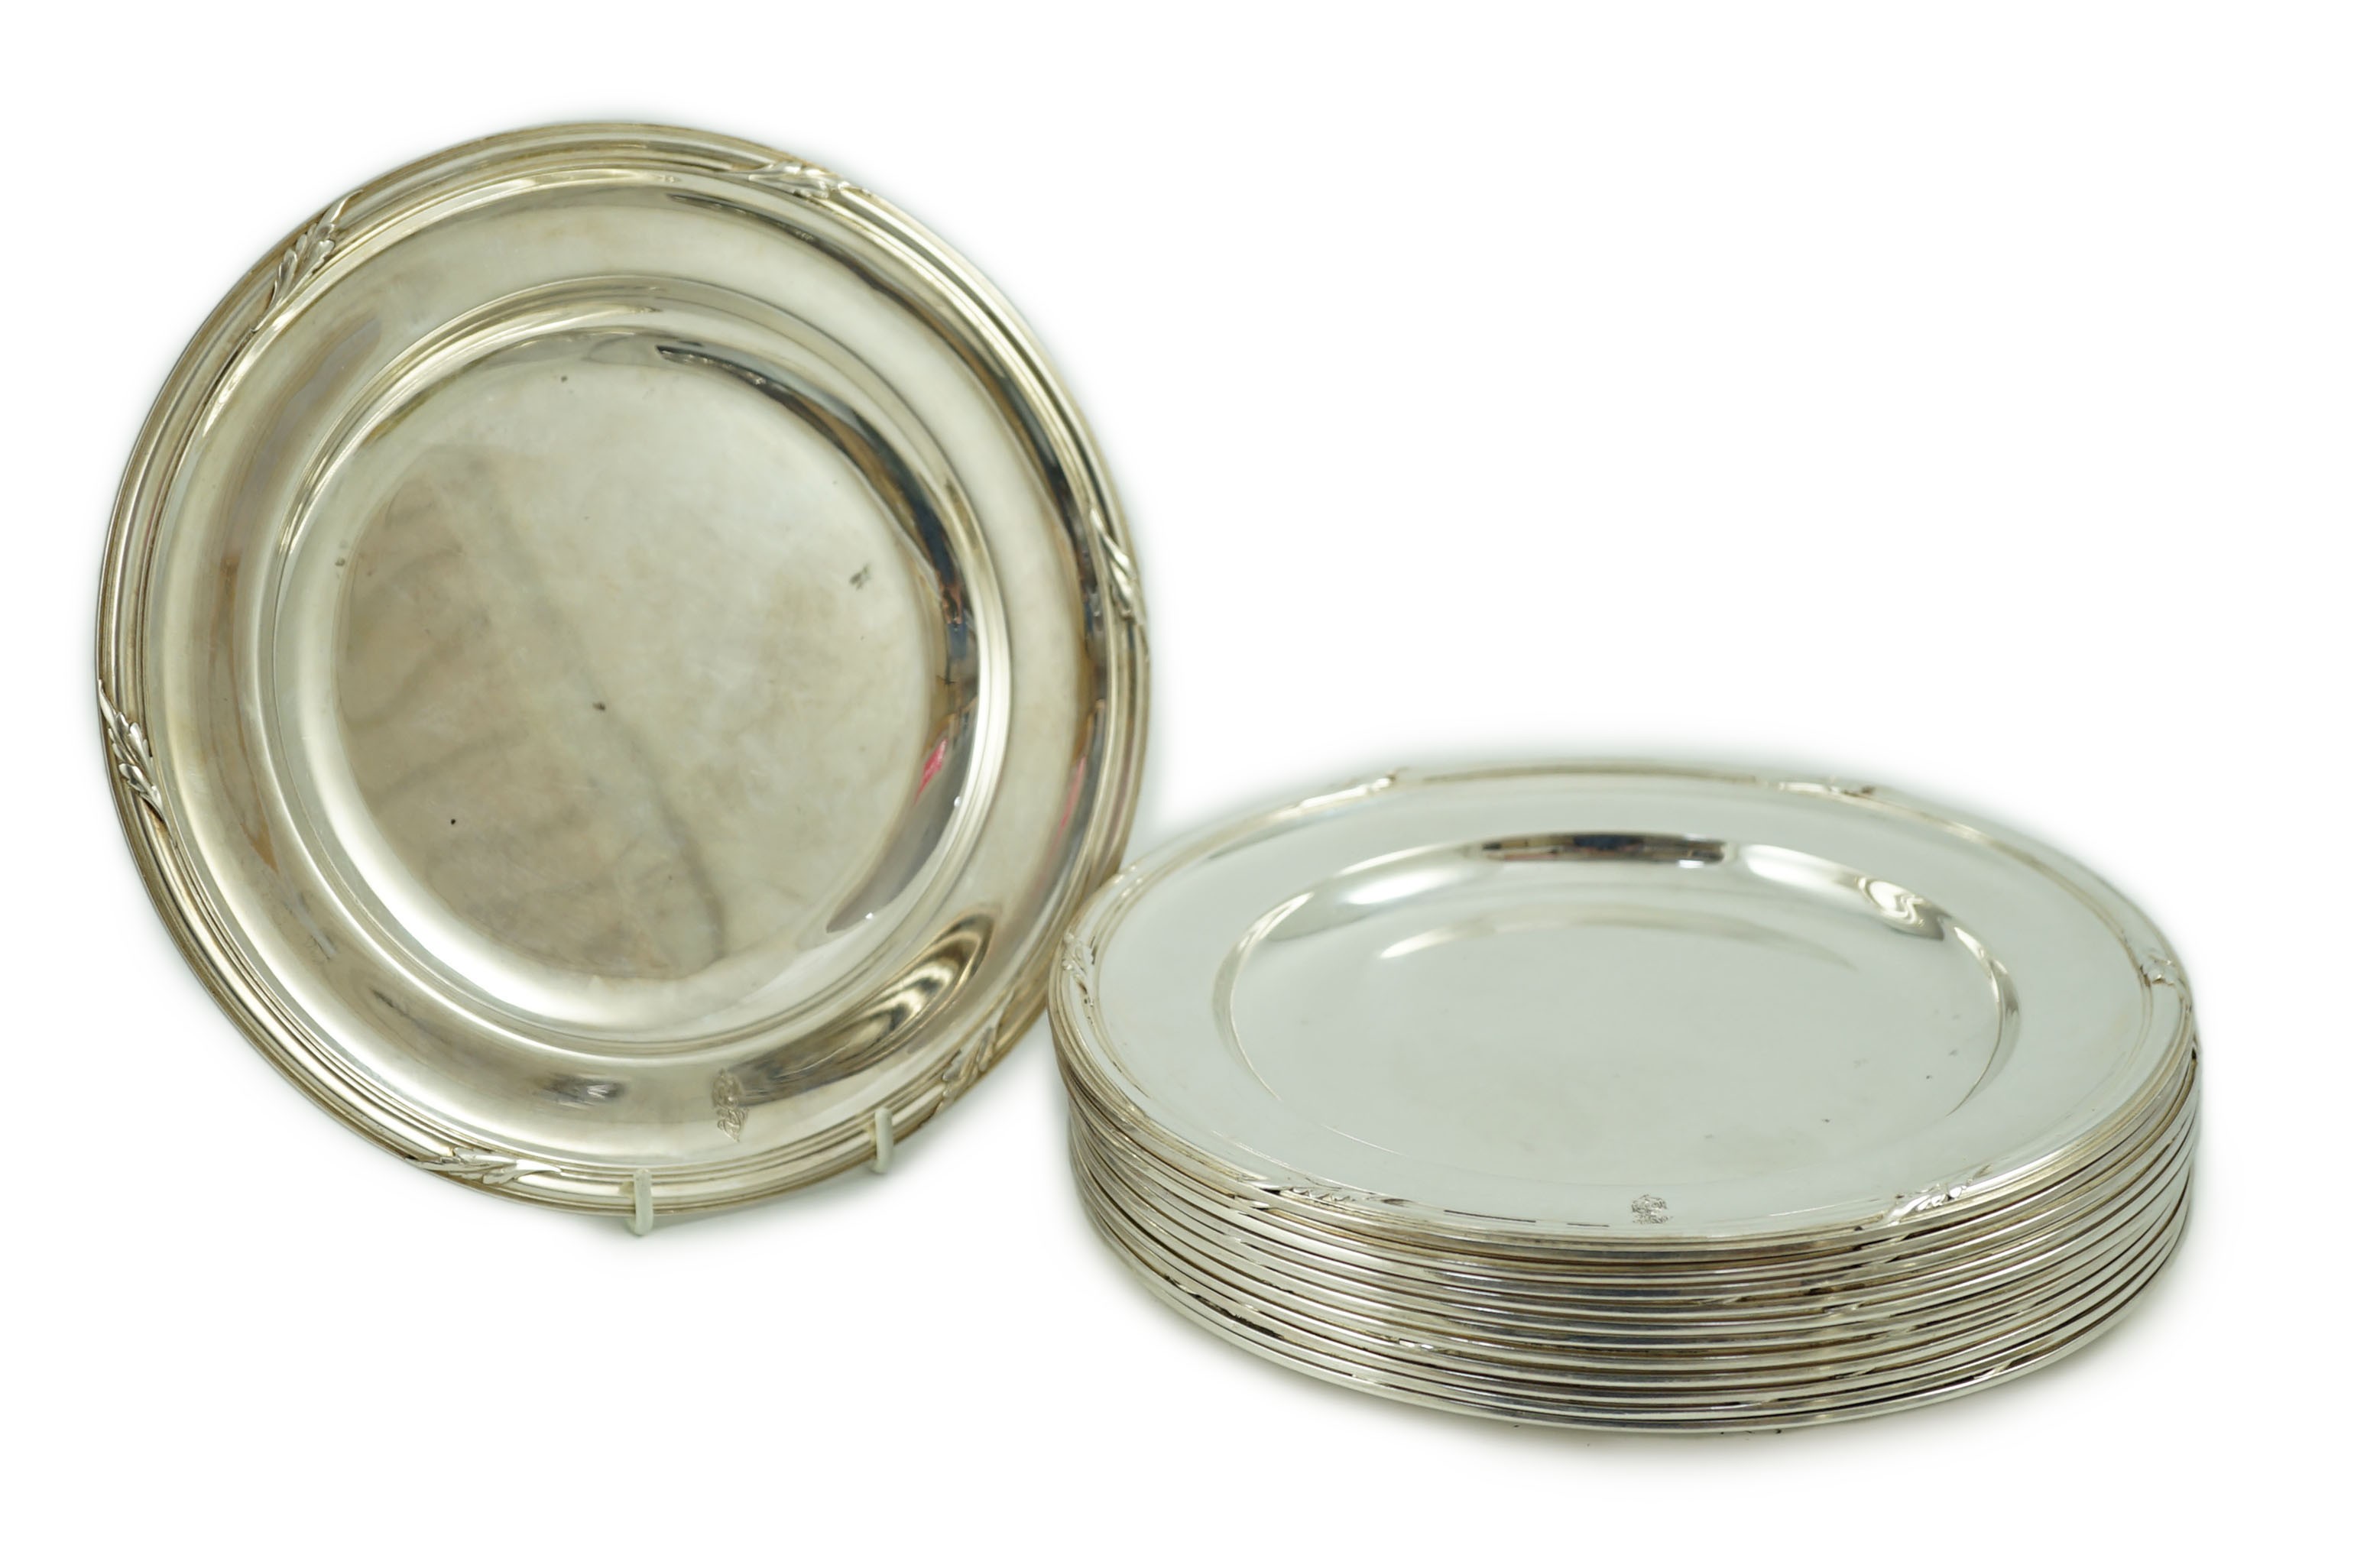 A set of late 19th/early 20th century twelve French 950 standard silver dinner plates by Gustave Keller, Paris